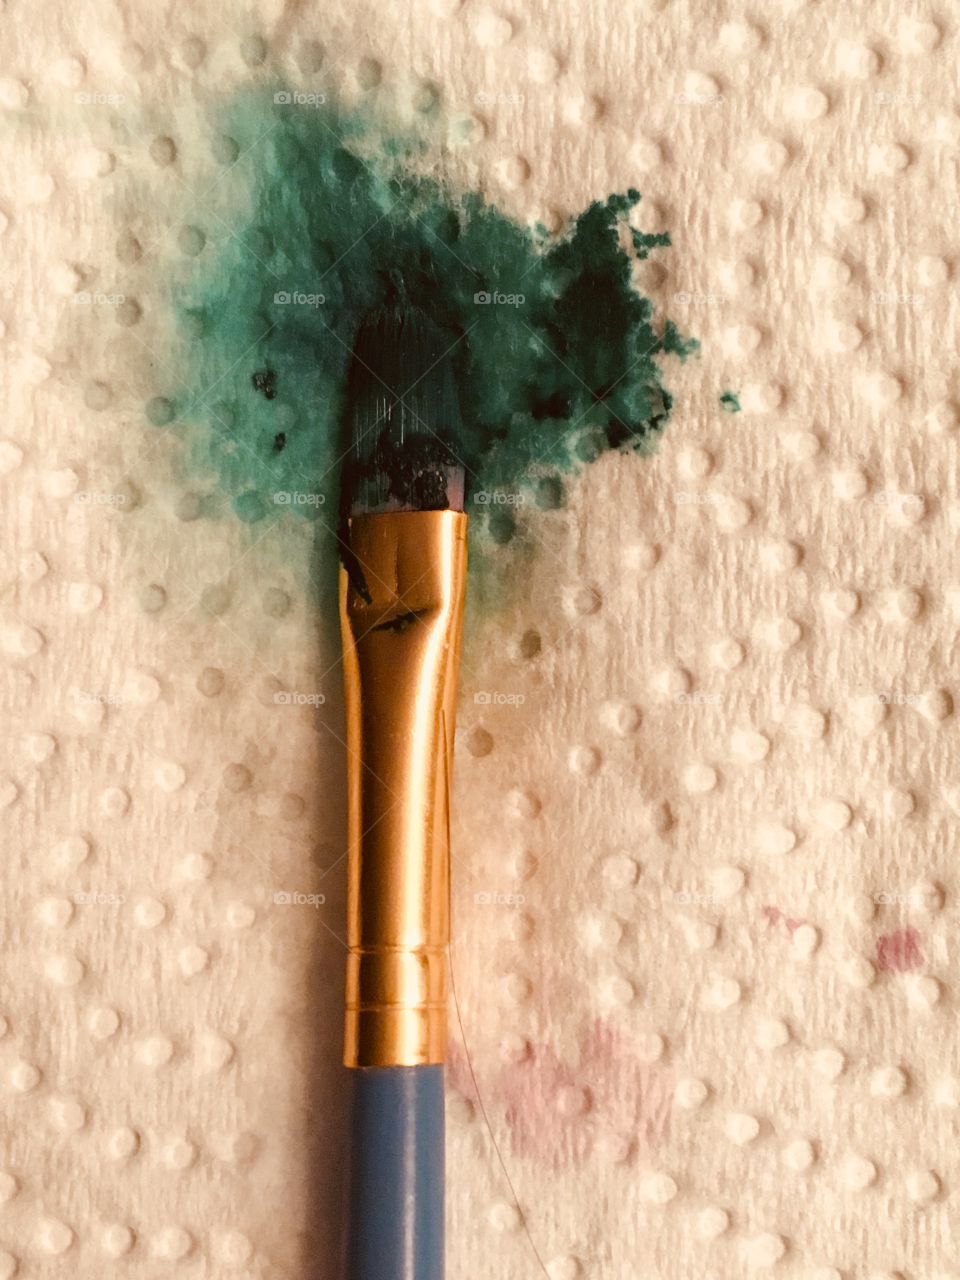 A close up of a used paintbrush resting on a paper towel